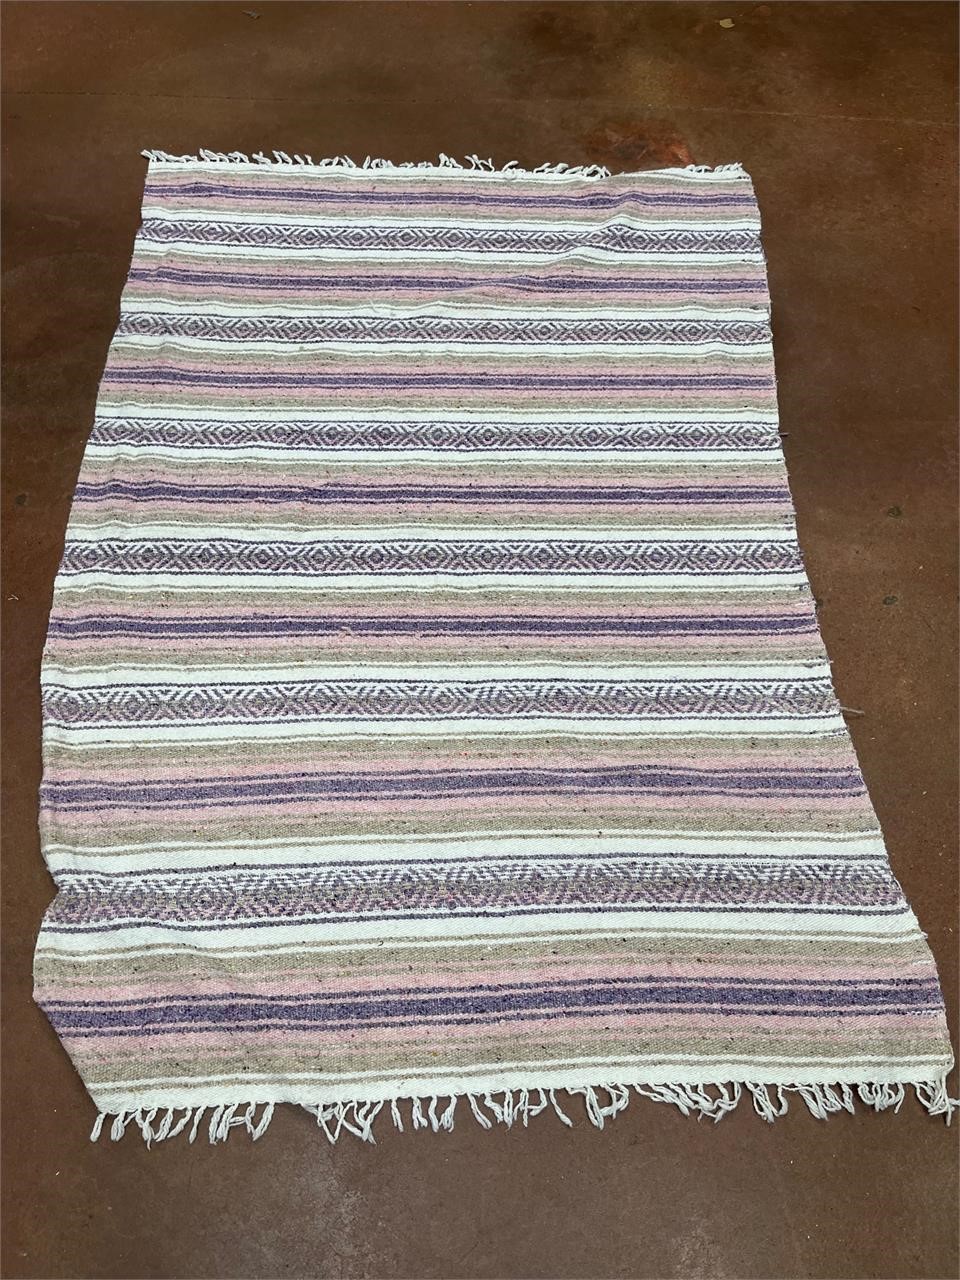 69”x48” Purple Pink and White Blanket